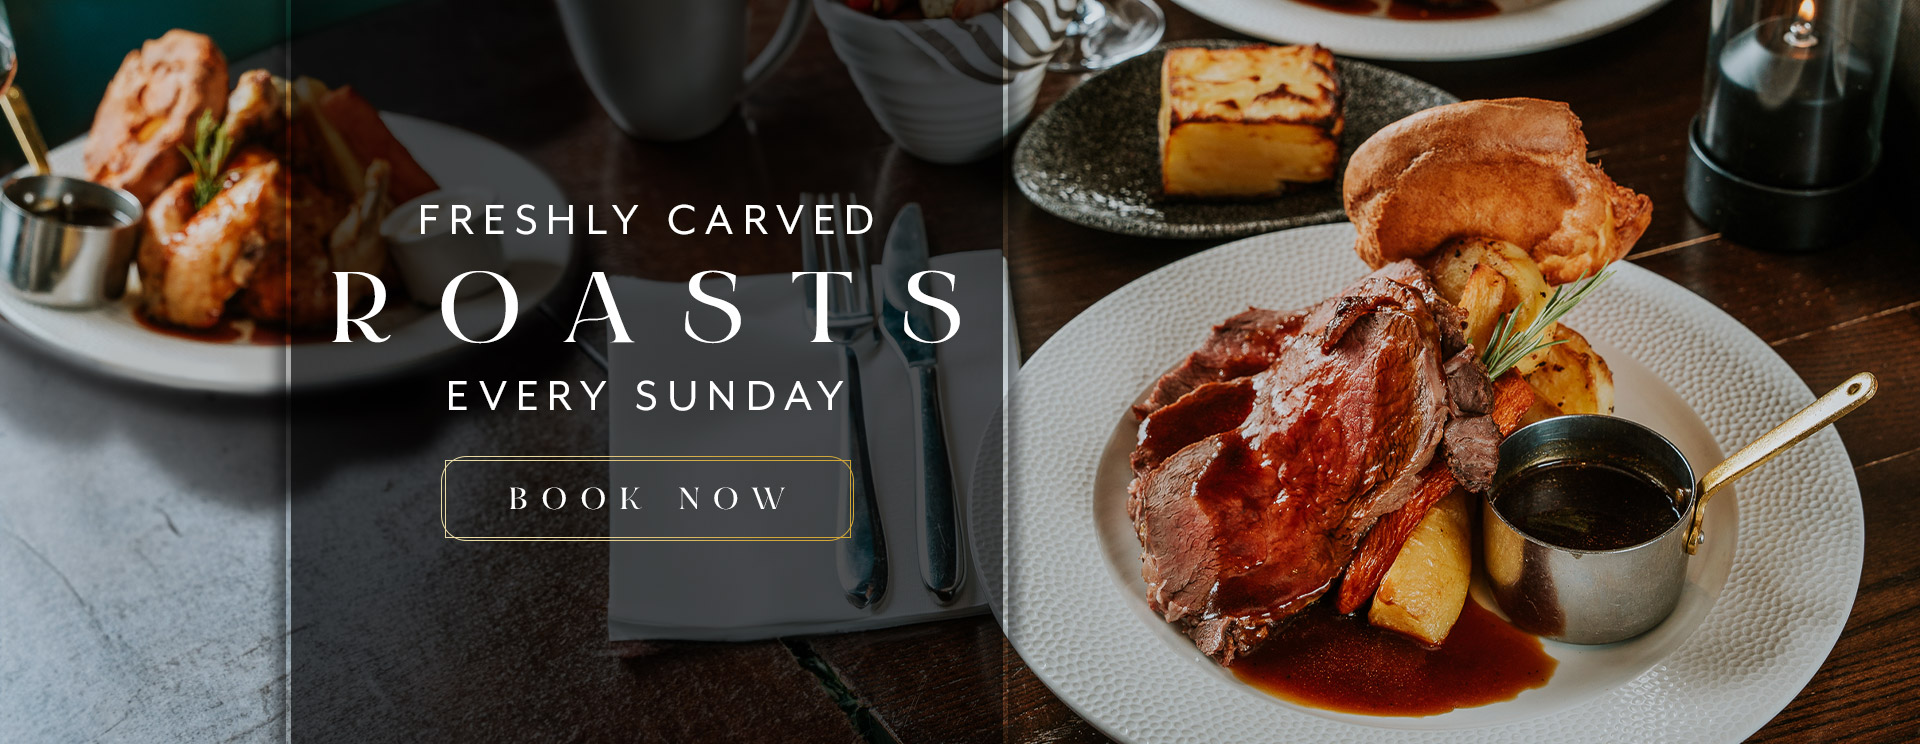 Sunday Lunch at The Fox & Hounds